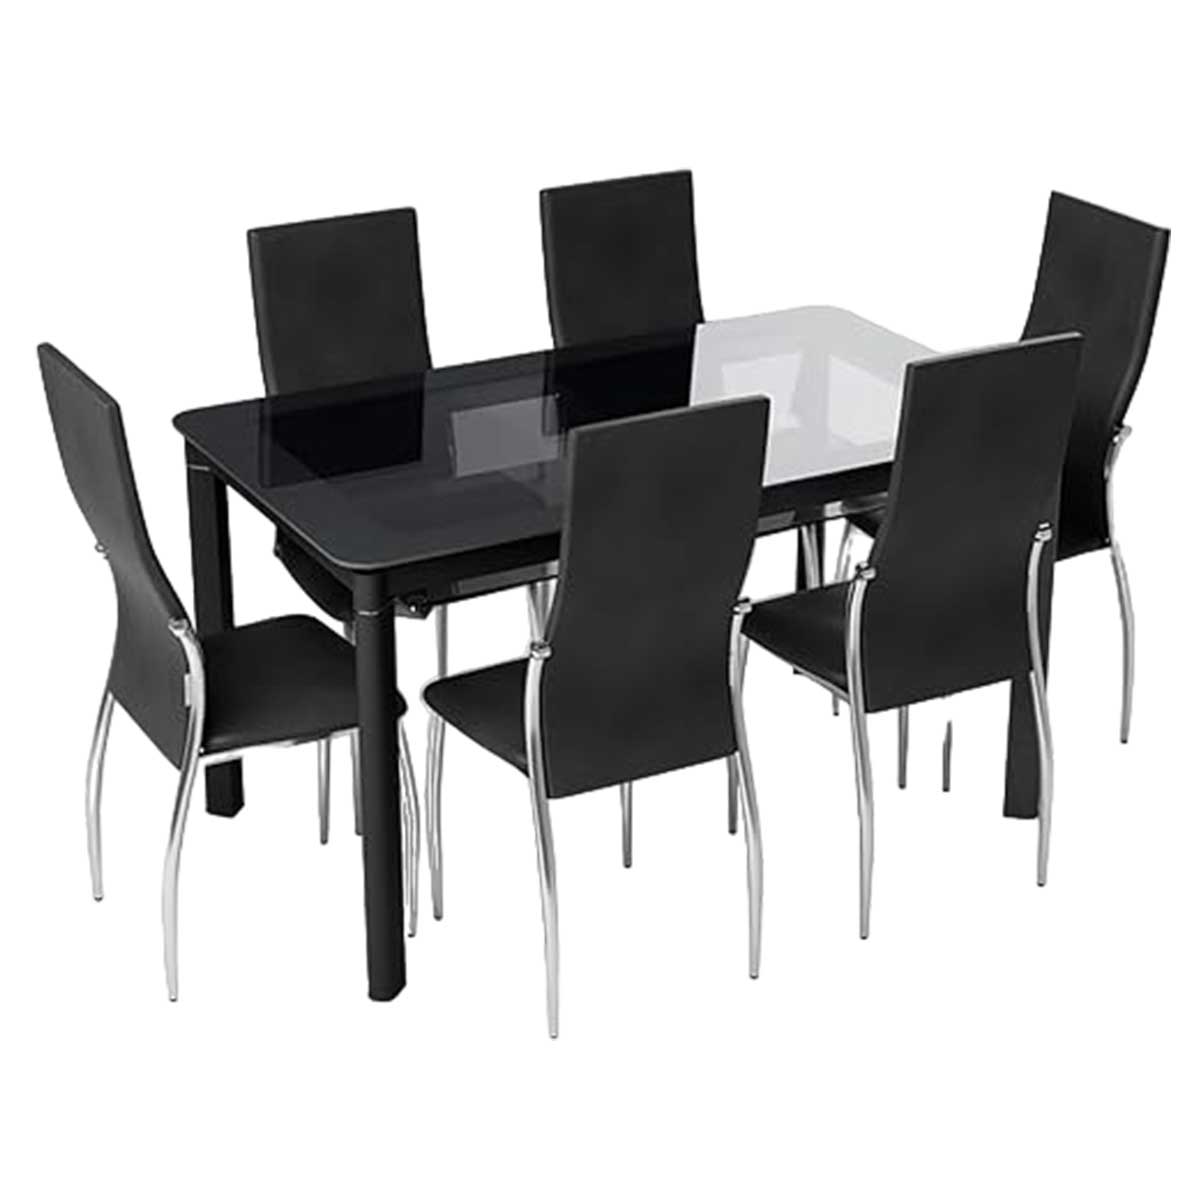 Cafeteria Furniture Set Manufacturers, Suppliers in Chandni Chowk